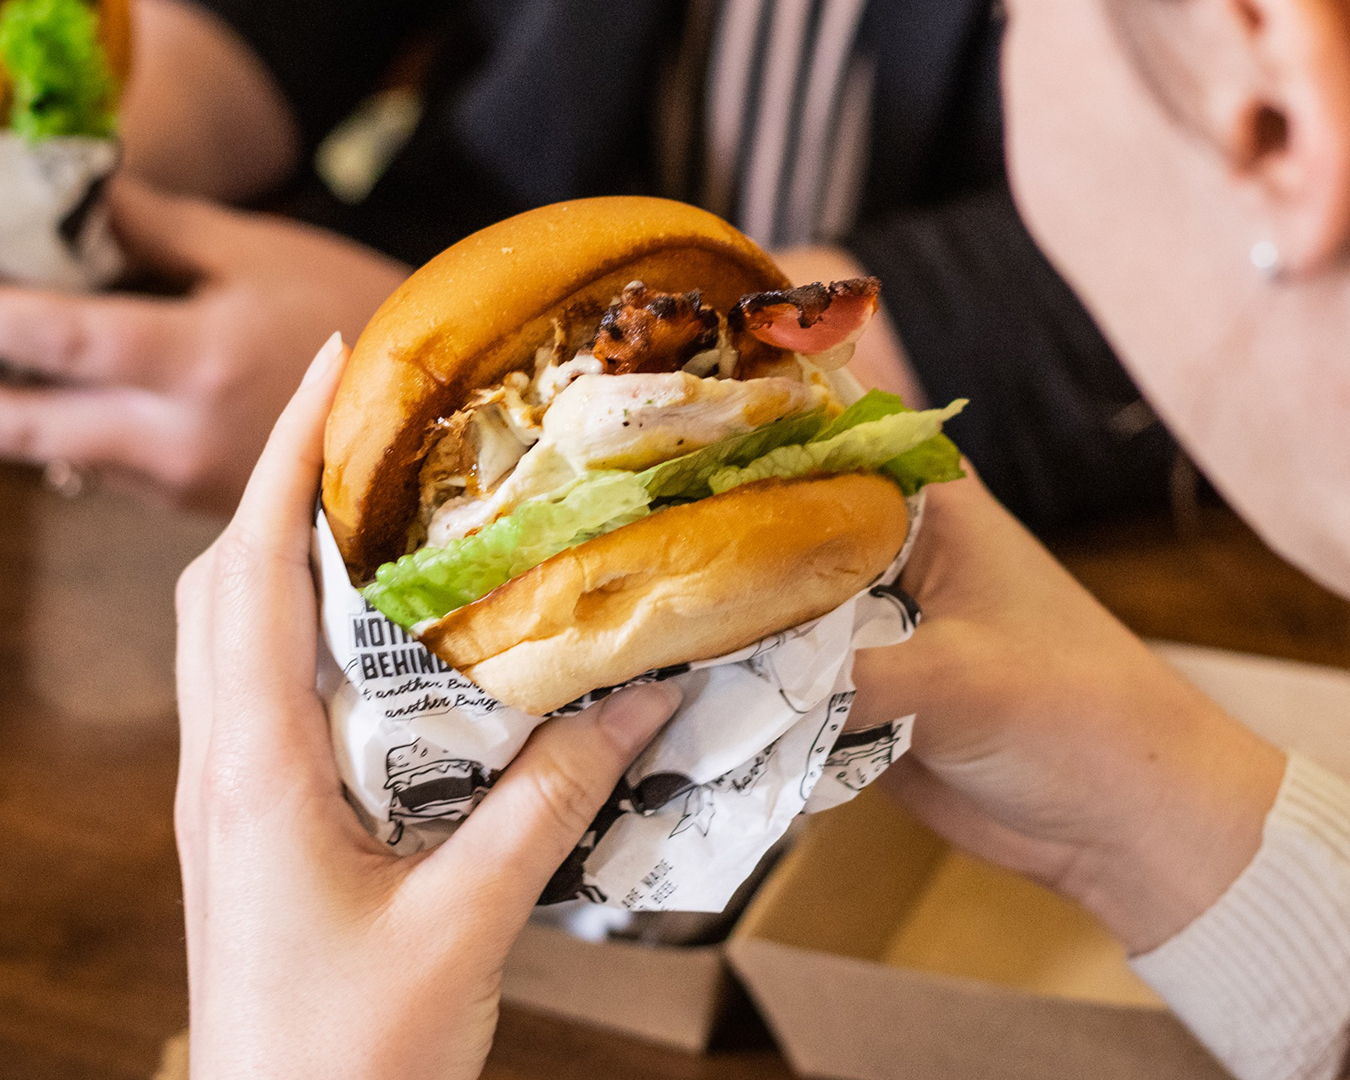 Someone gets ready to tuck into a delicious looking burger at EAT Burger.